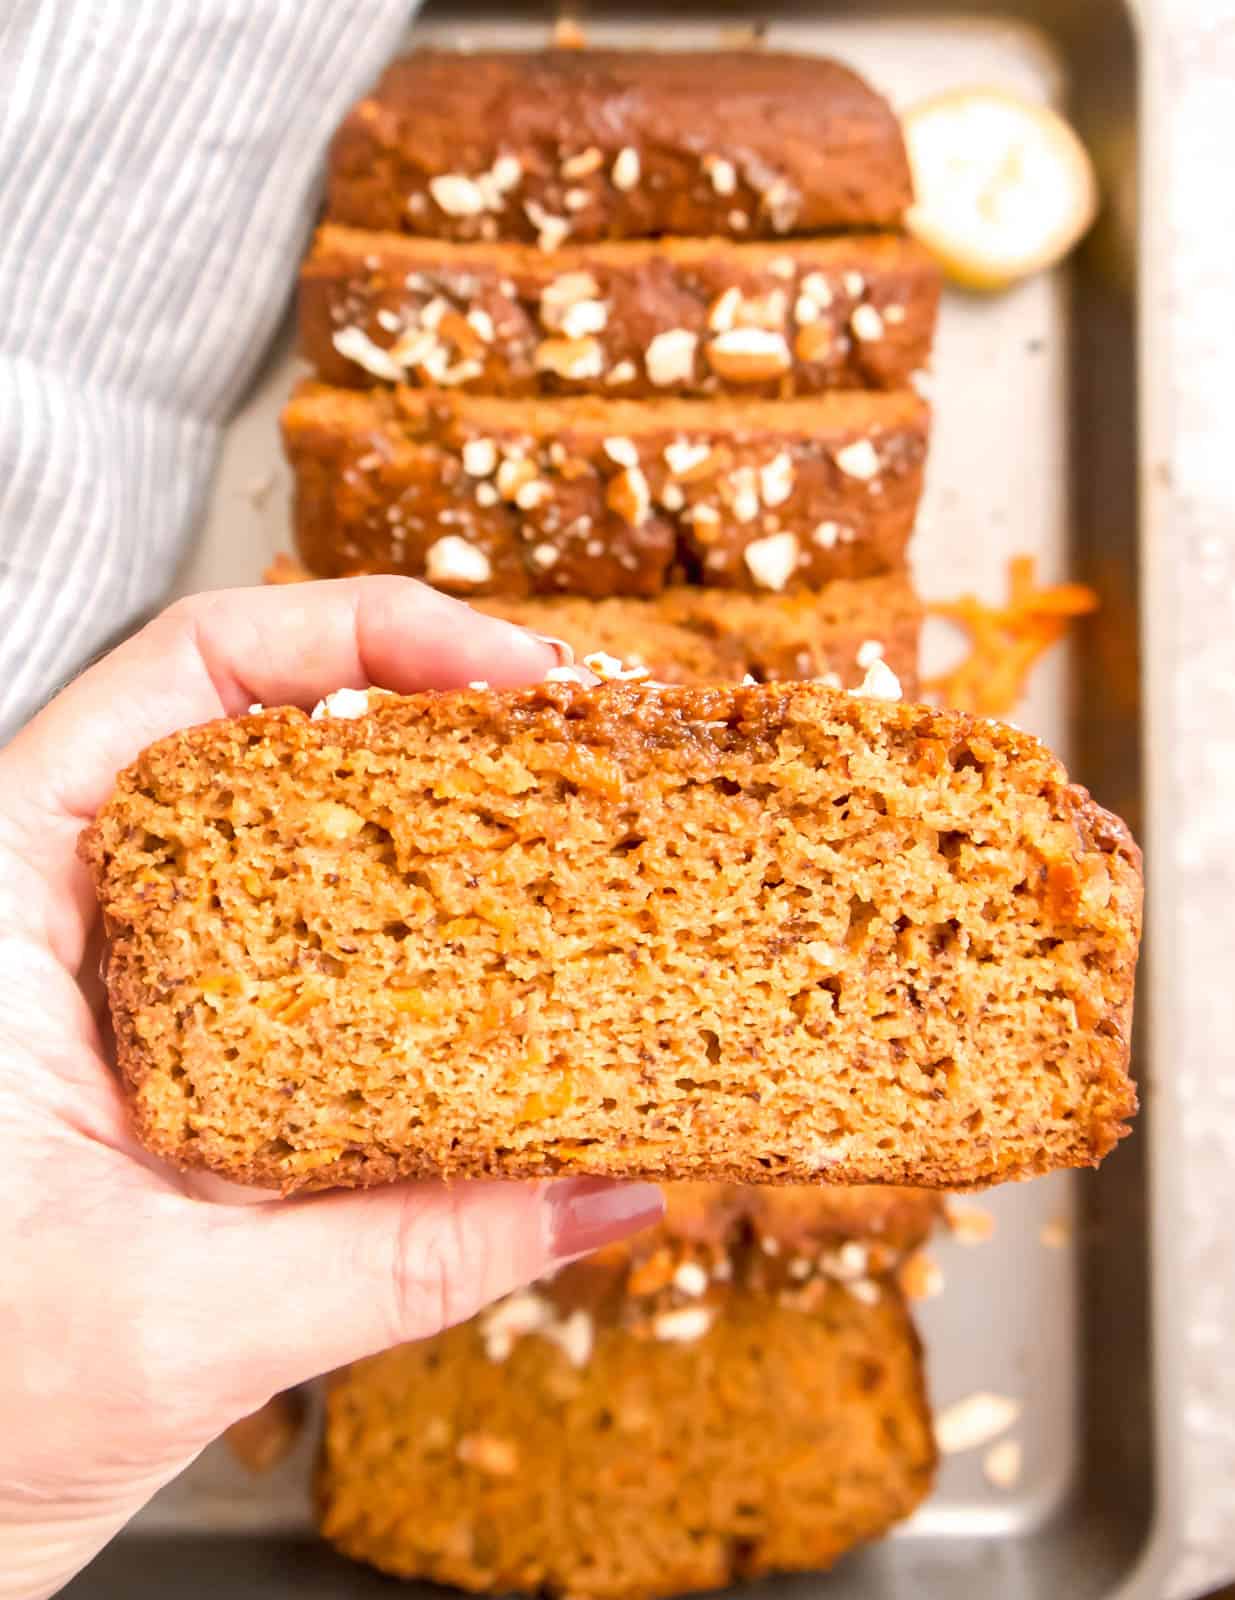 A slice of Paleo Carrot Cake Banana Bread lifted by hands.